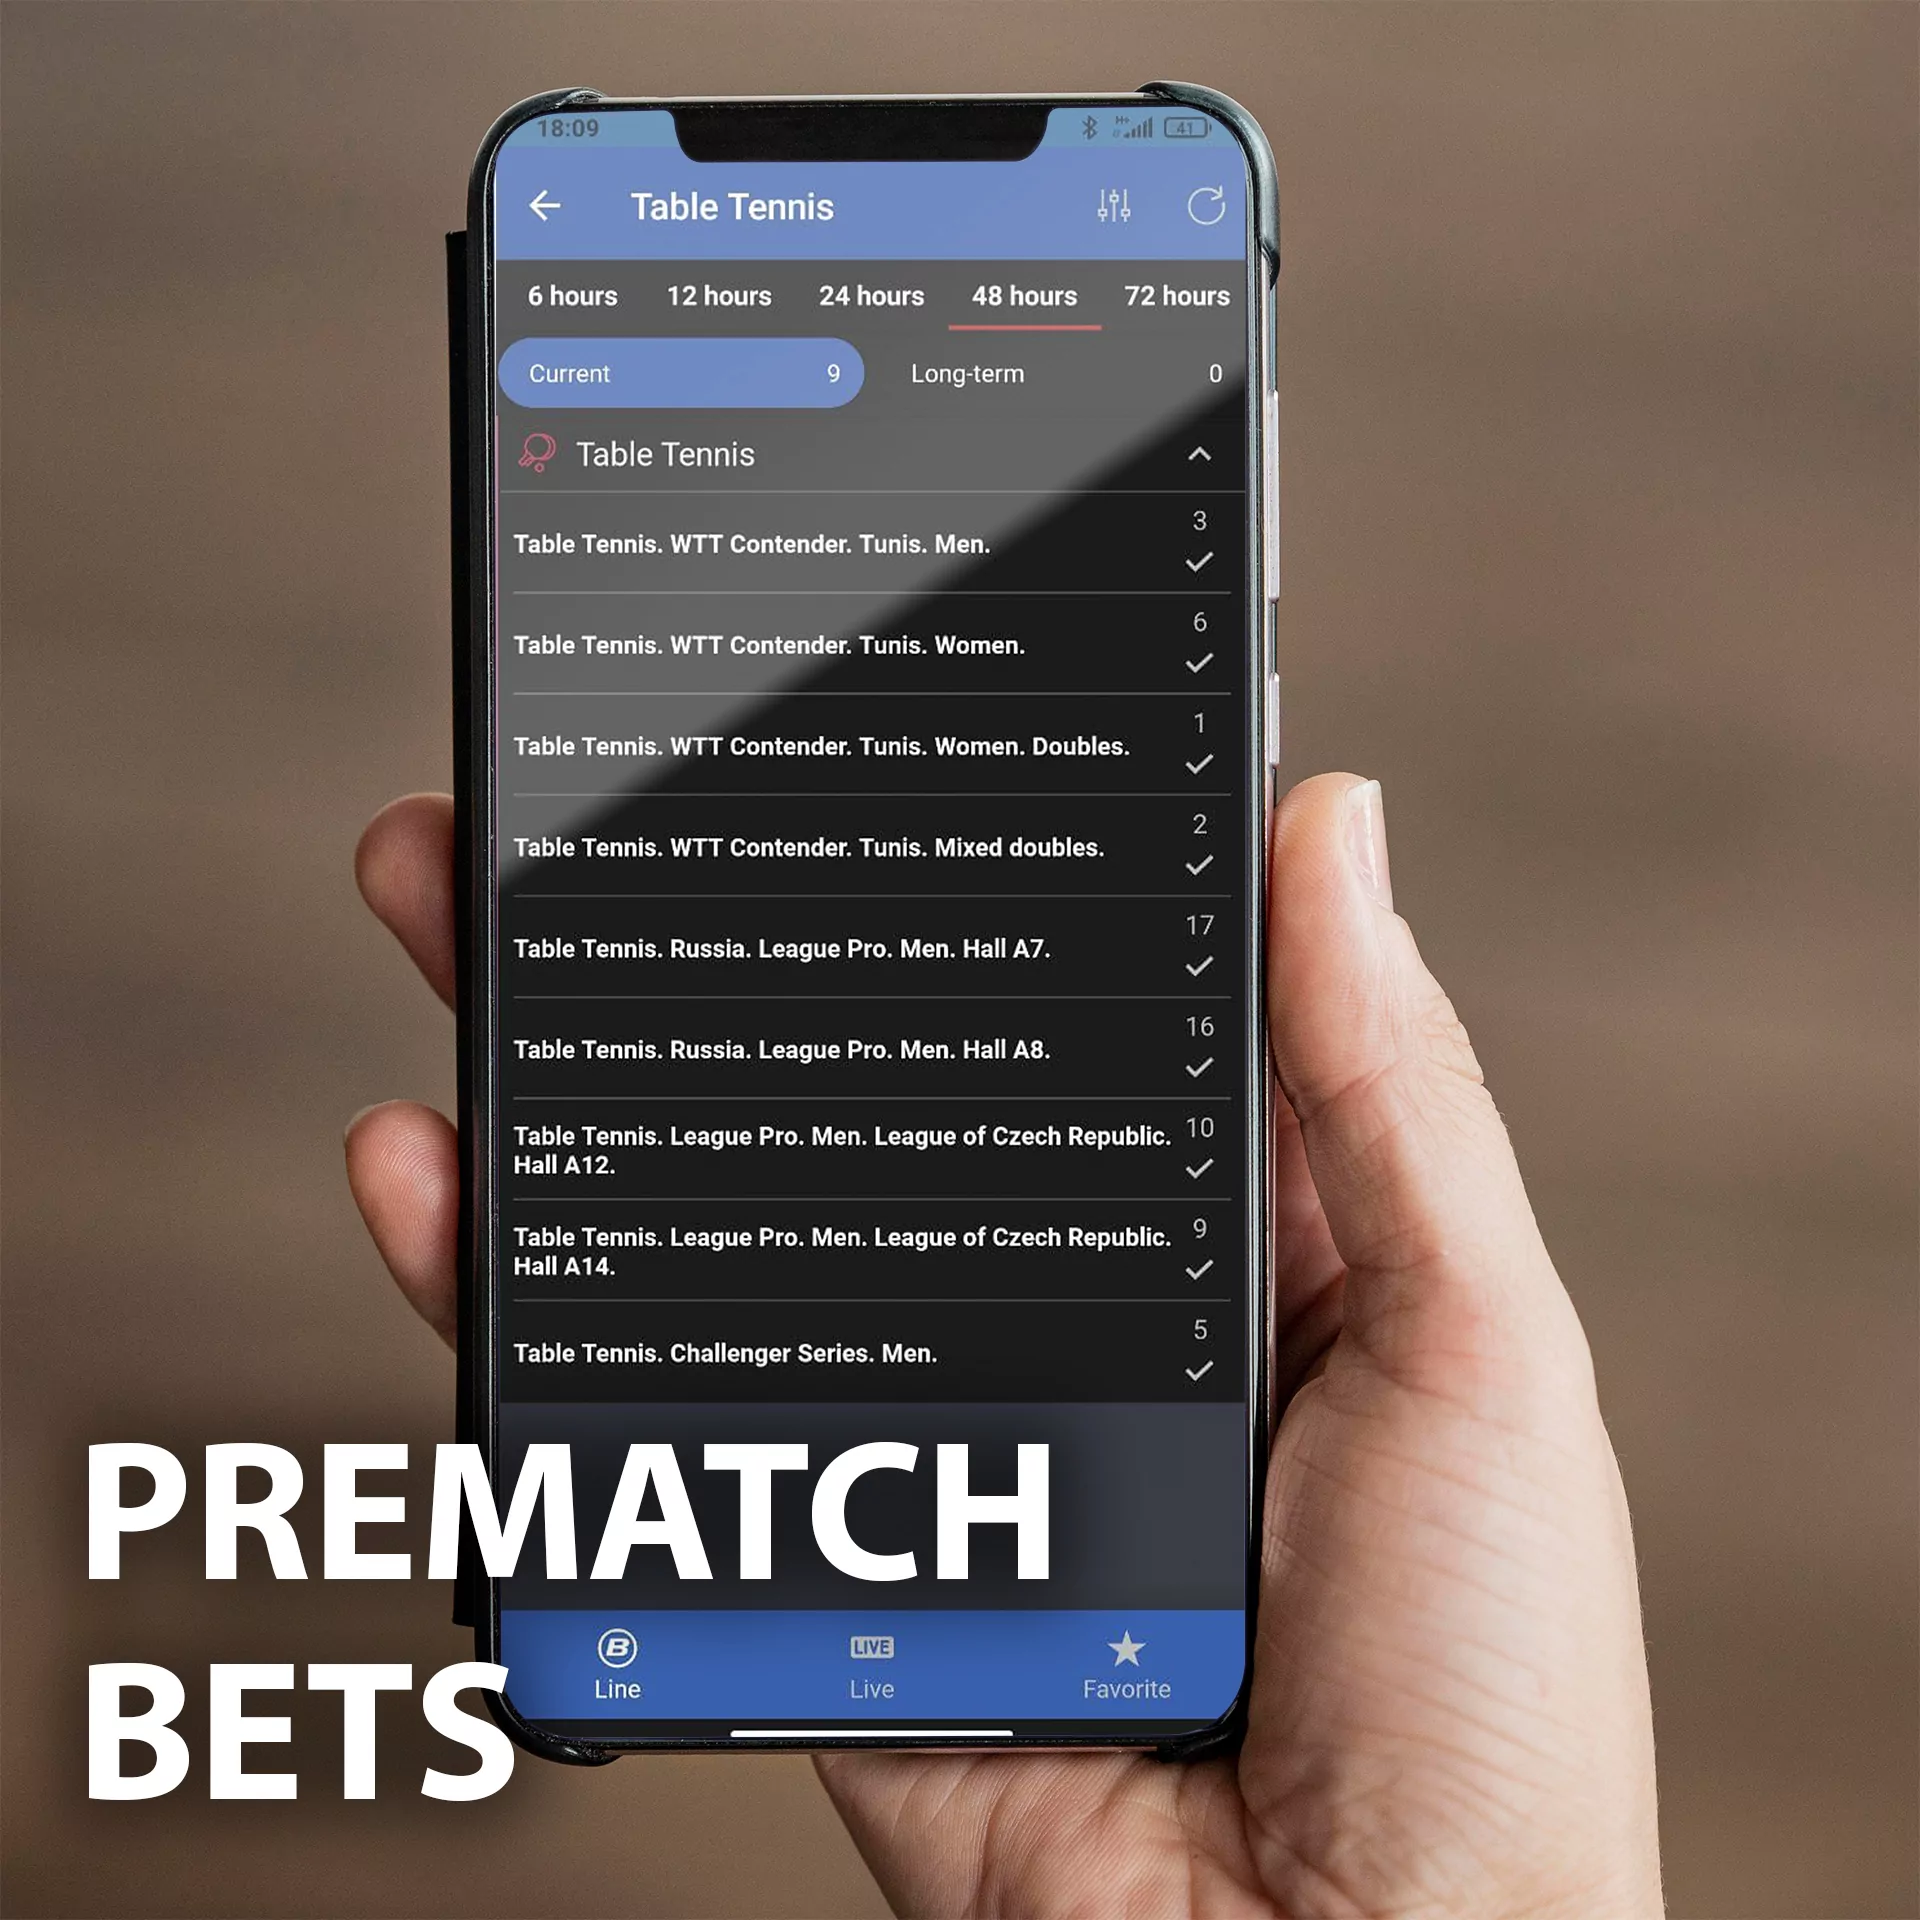 You can place prematch bets in the Betcity app.